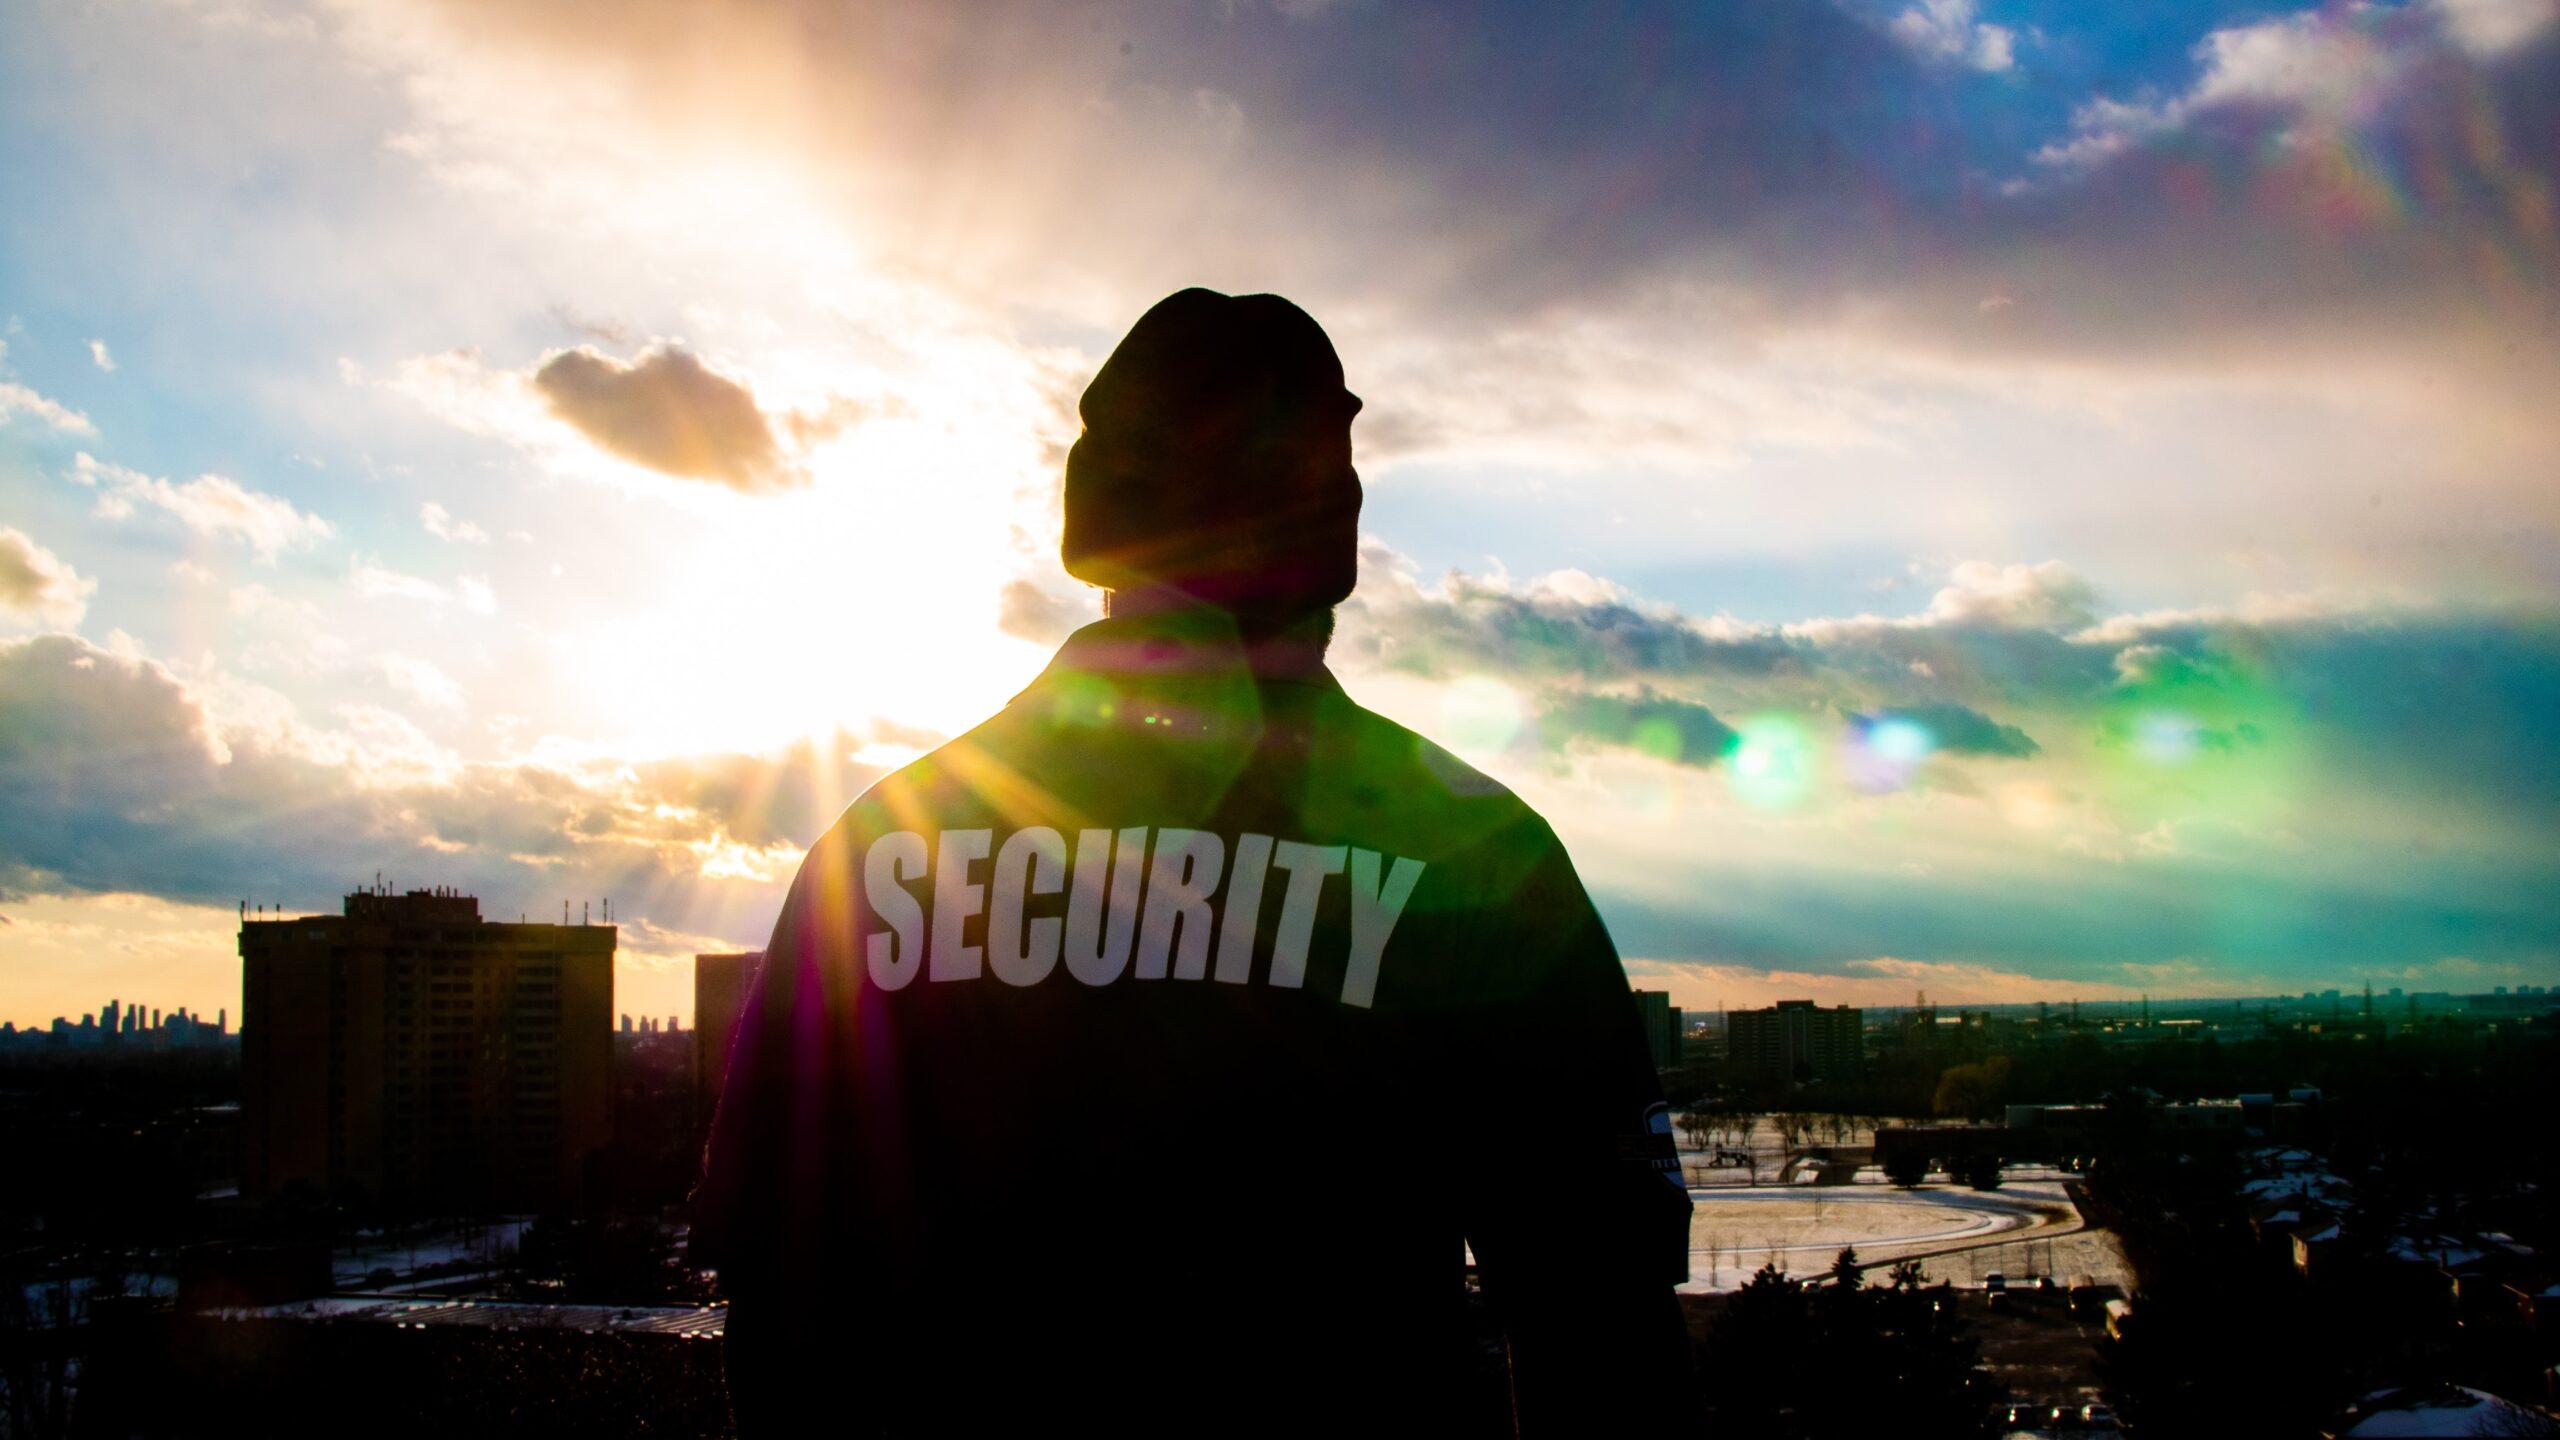 Product Security Consultant - Security Guard & Risk Assessment Services image